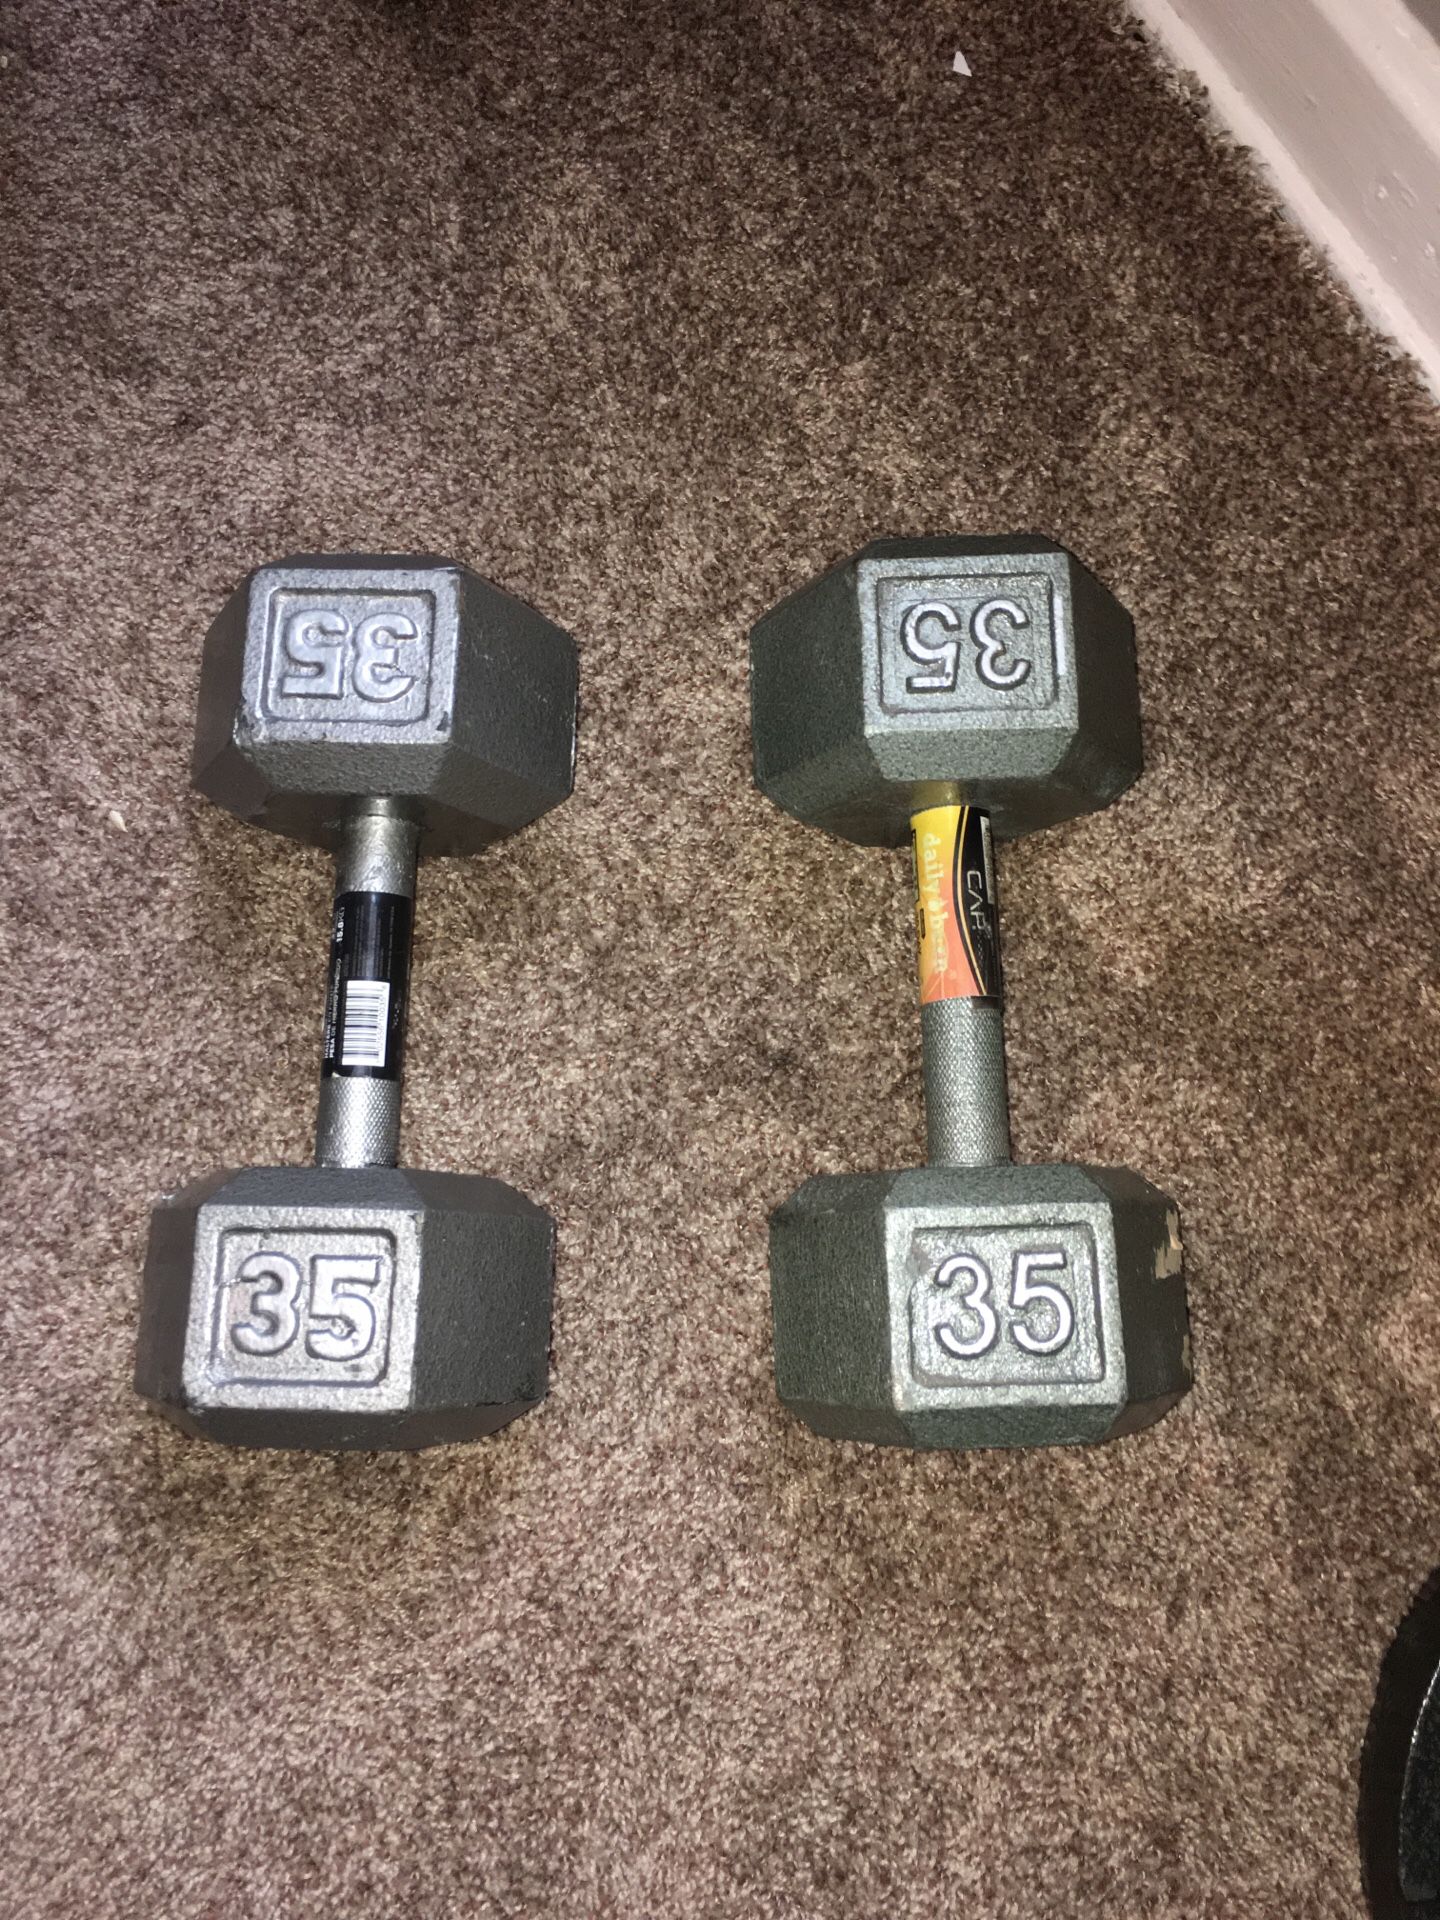 Two 35 pound dumbbells